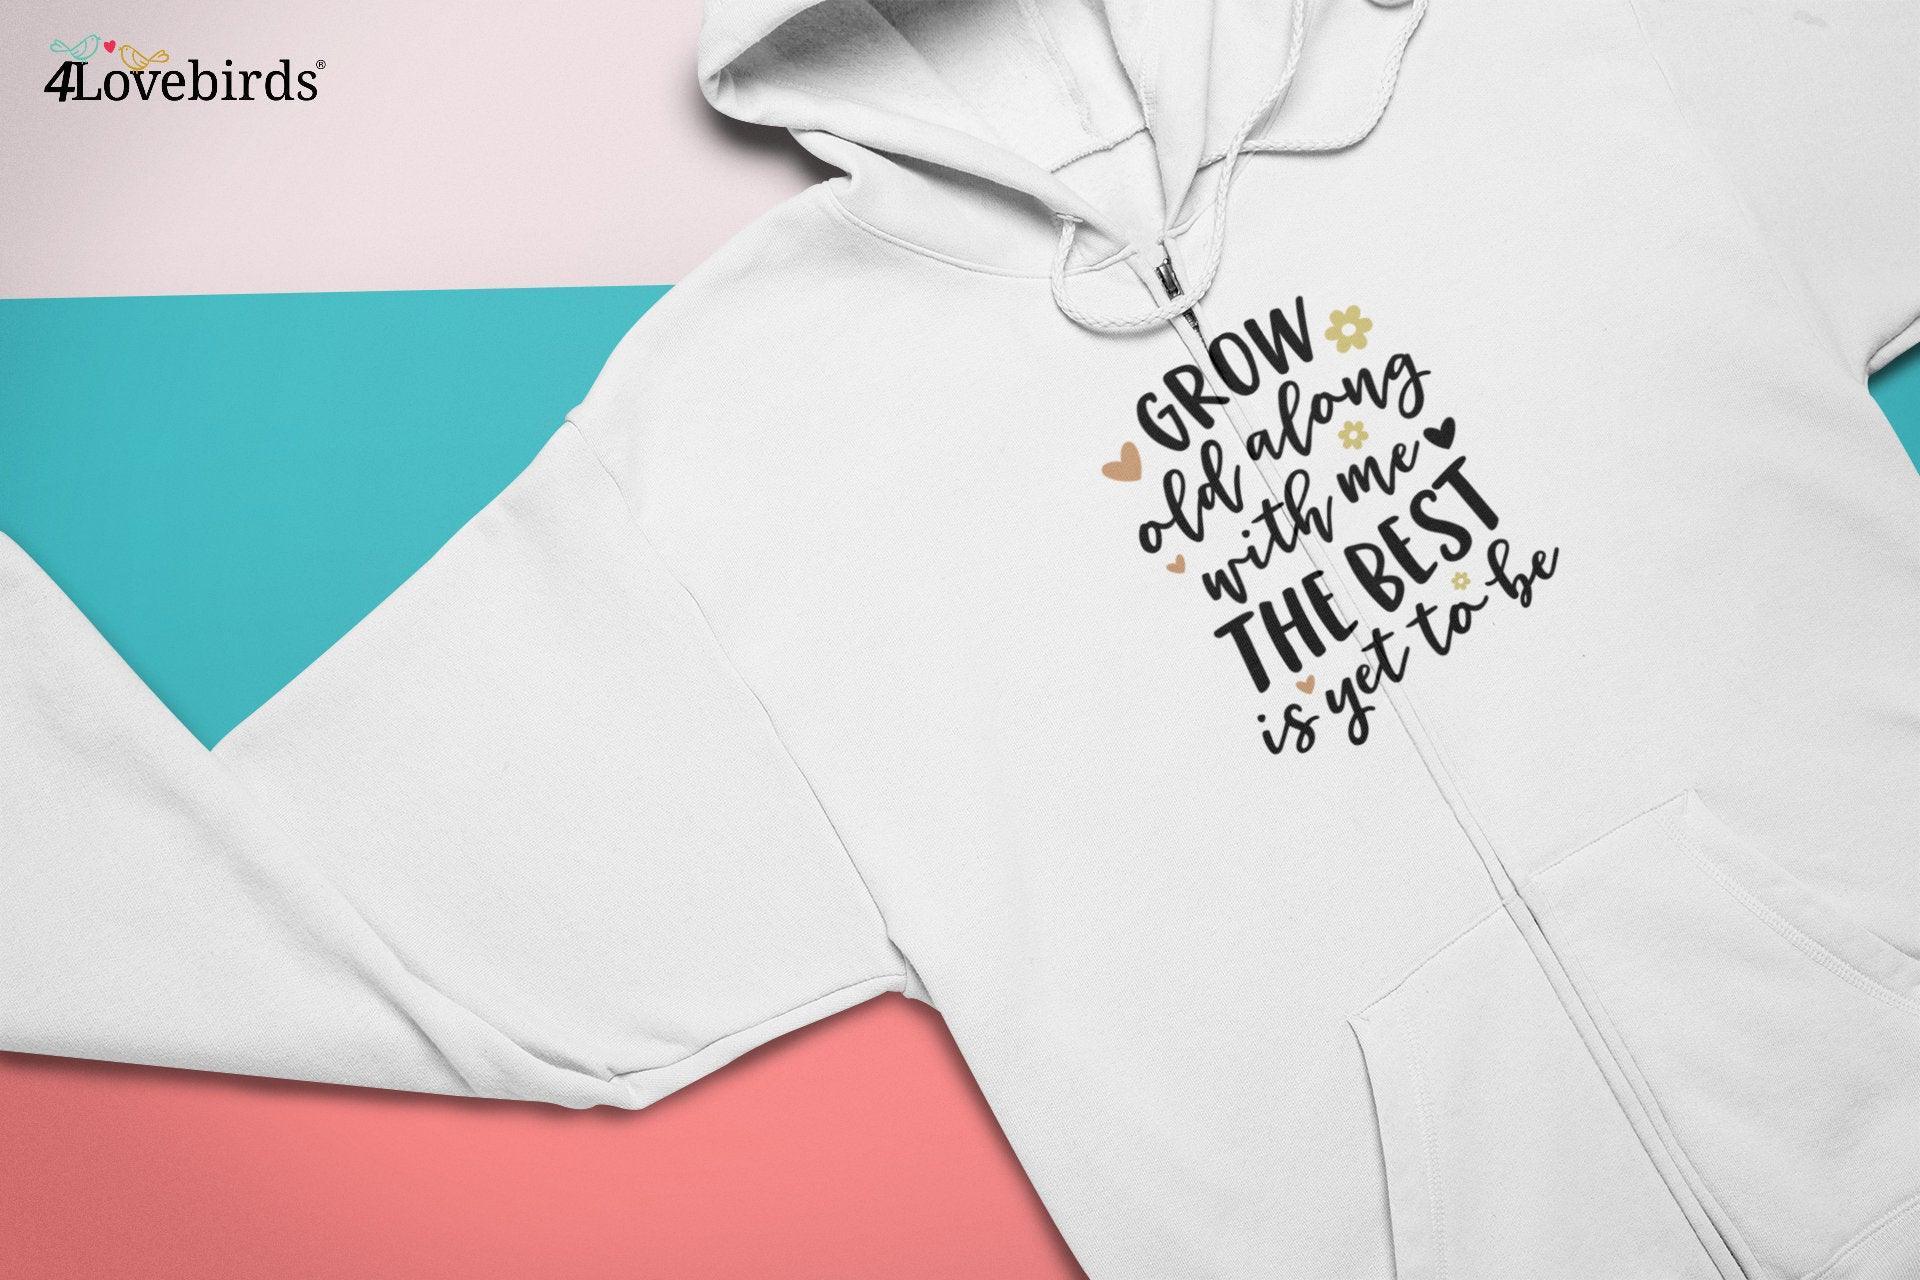 Grow old along with me the best is yet to be Hoodie, Lovers matching T-shirt, Gift for Couples, Valentine Sweatshirt, Cute Longsleeve - 4Lovebirds